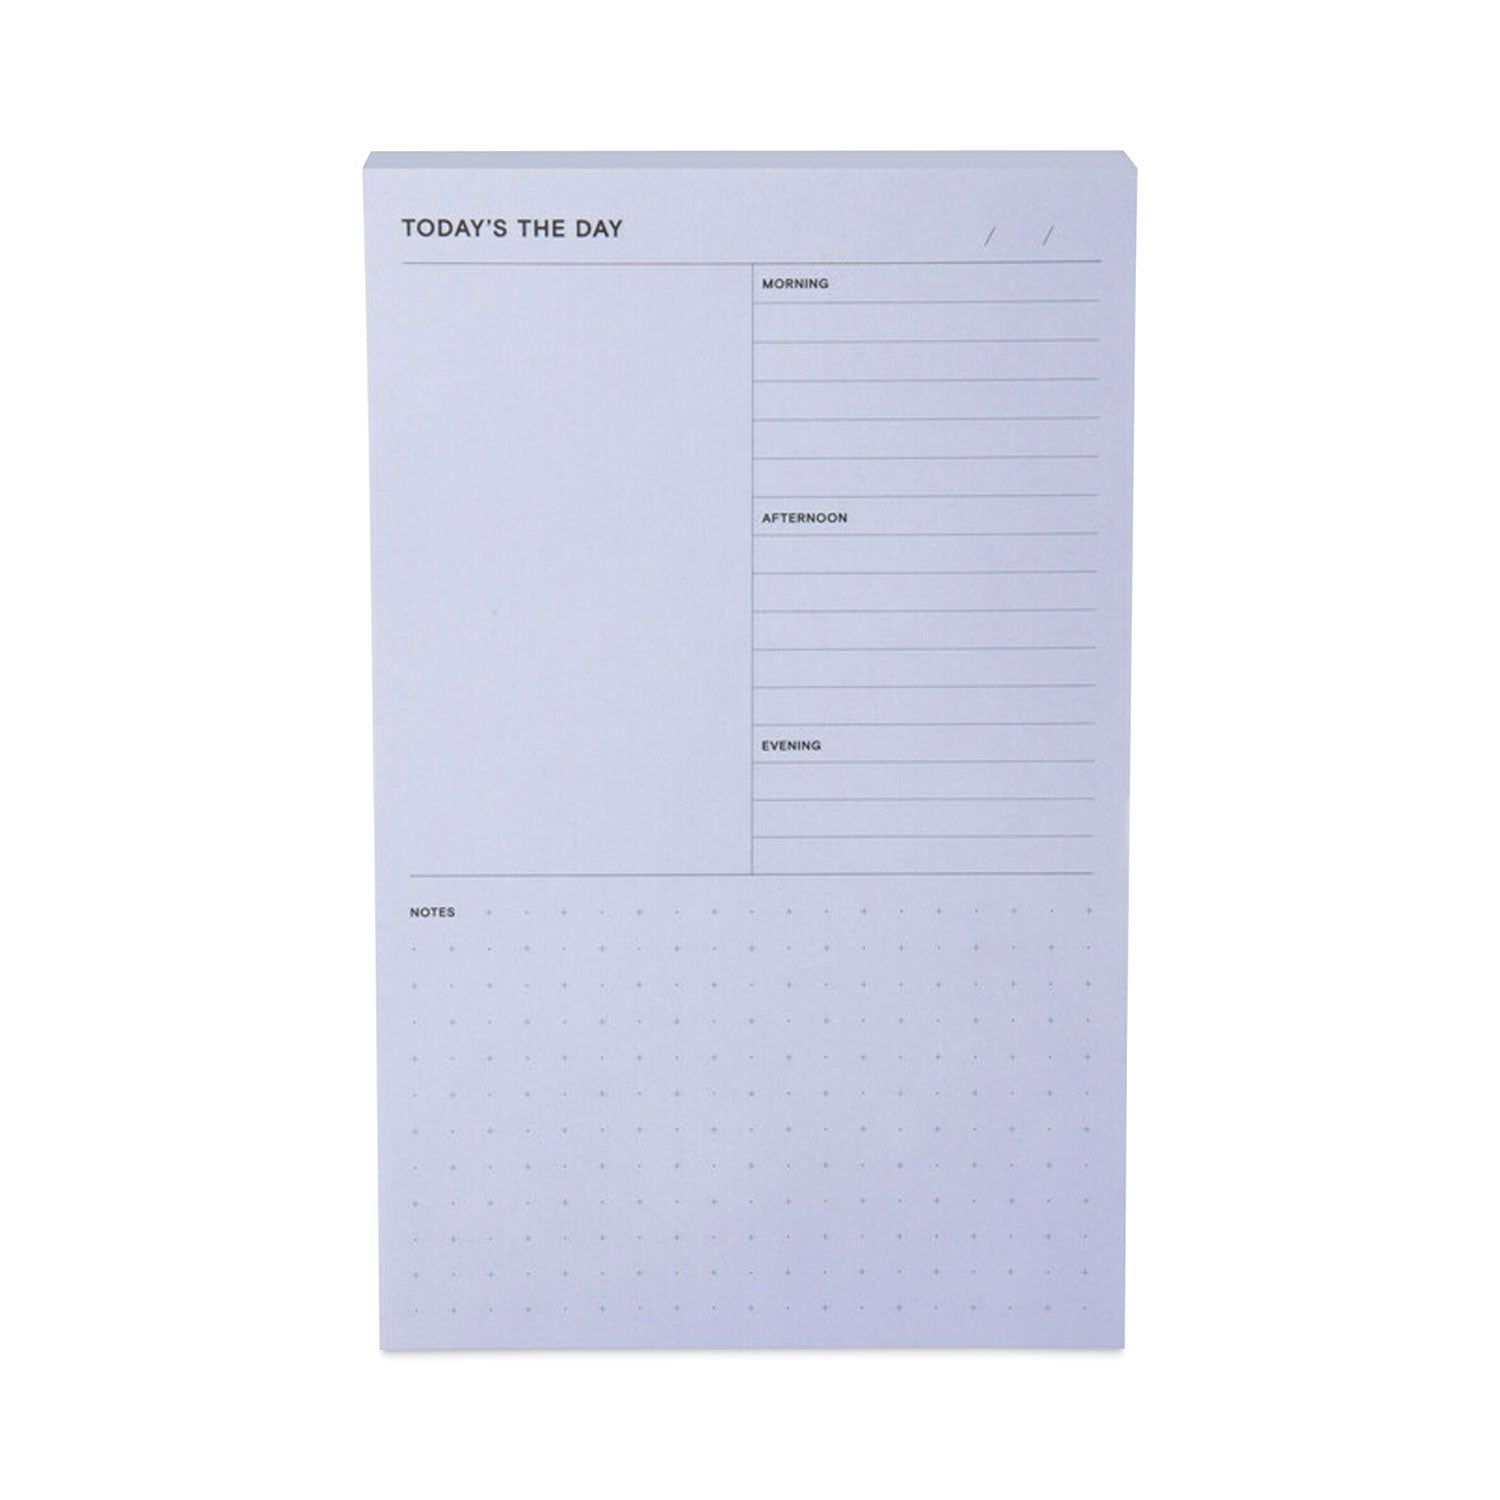 adhesive-daily-planner-sticky-note-pads-daily-planner-format-49-x-77-blue-100-sheets-pad_mmm58blu - 1